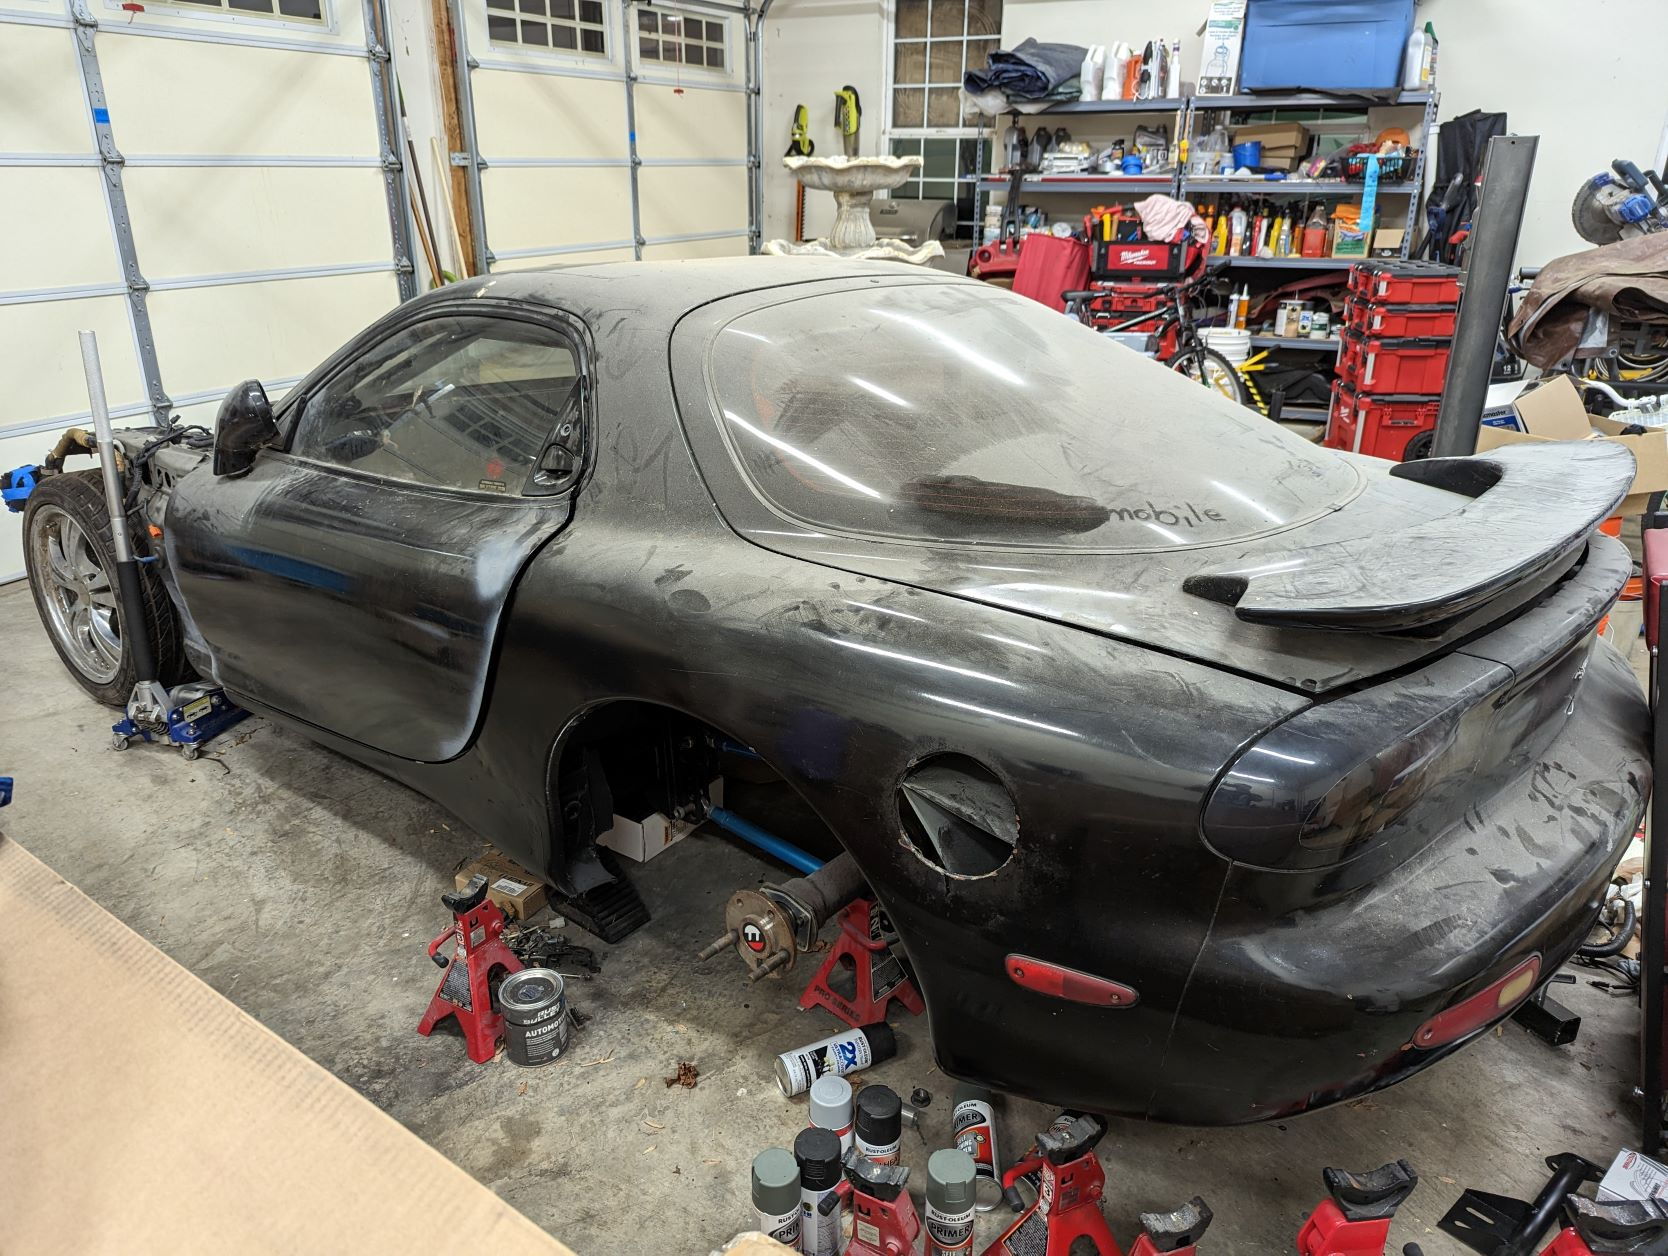 1993 Mazda RX-7 - 93 RX7 Rolling Chassis - with 9" straight axle, cage, completed suspension, more - Used - VIN JM1FD3318P0209968 - Black - Prince Frederick, MD 20678, United States